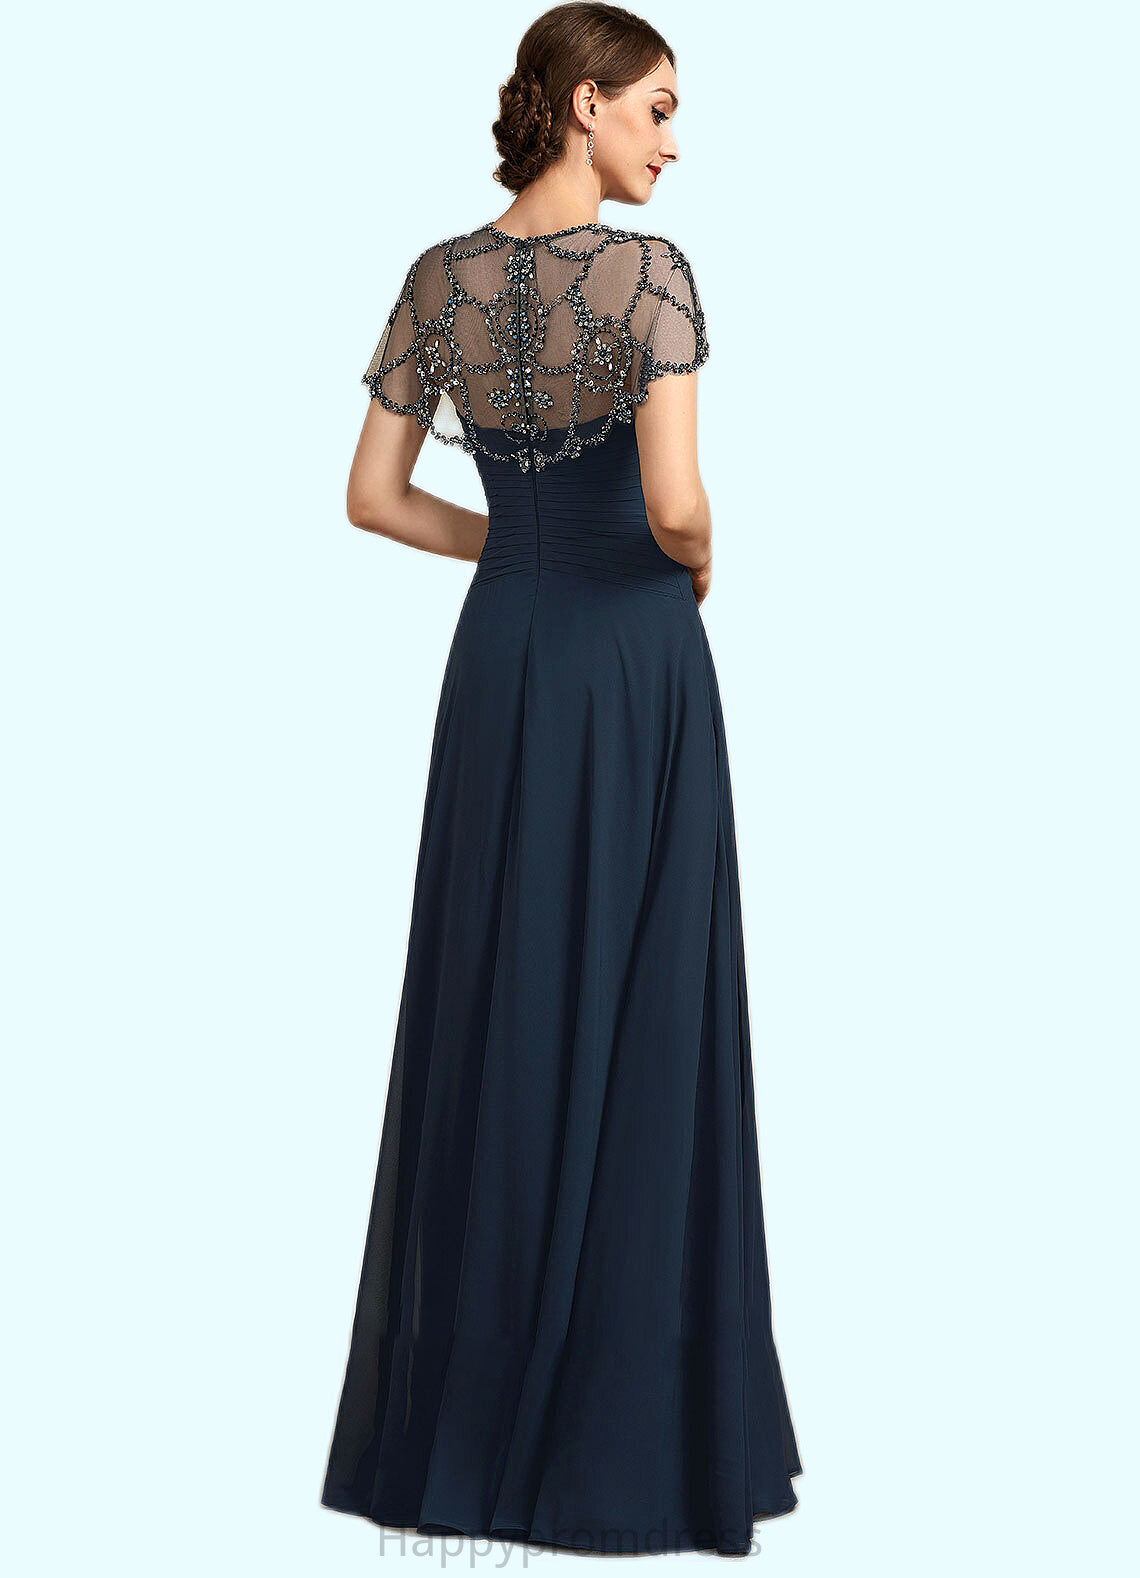 Skye A-Line Scoop Neck Floor-Length Chiffon Mother of the Bride Dress With Ruffle Beading Sequins XXS126P0014711